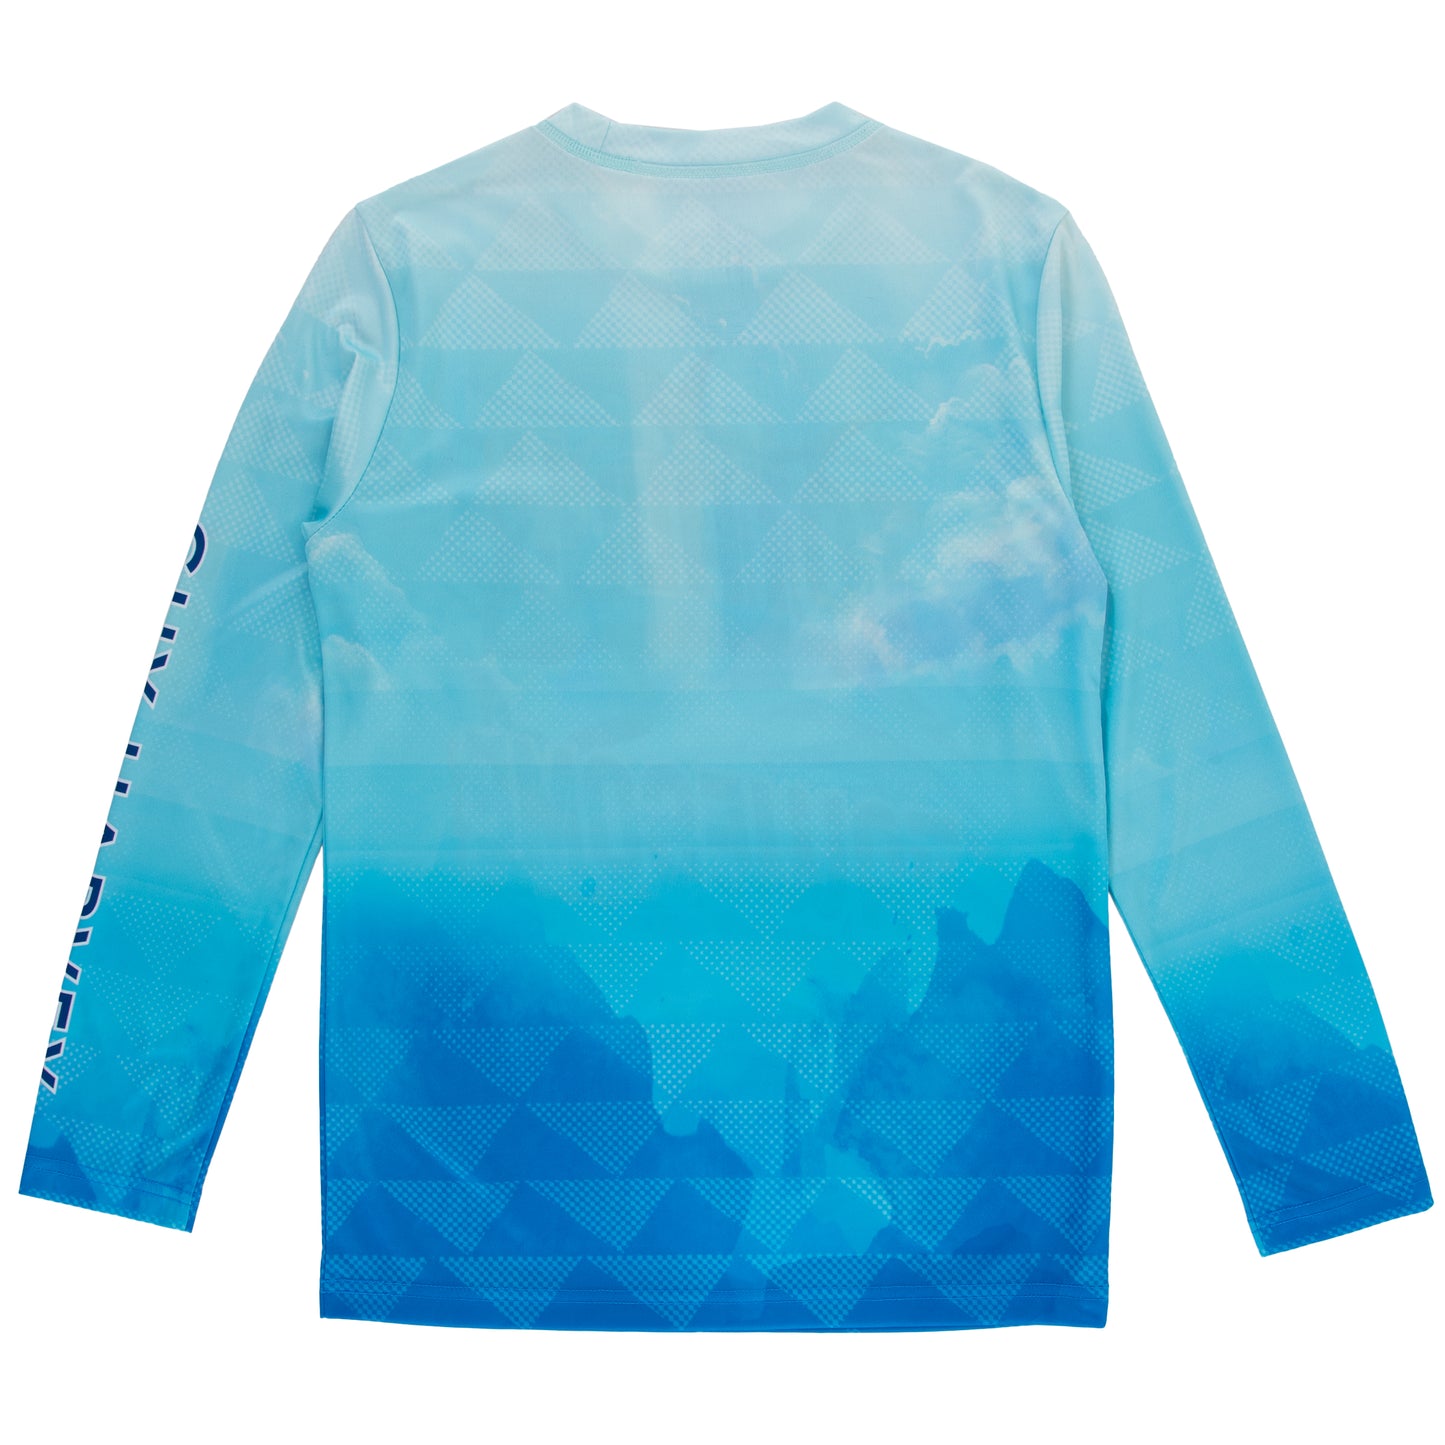 Kids Totally Jawsome Sun Protection Top